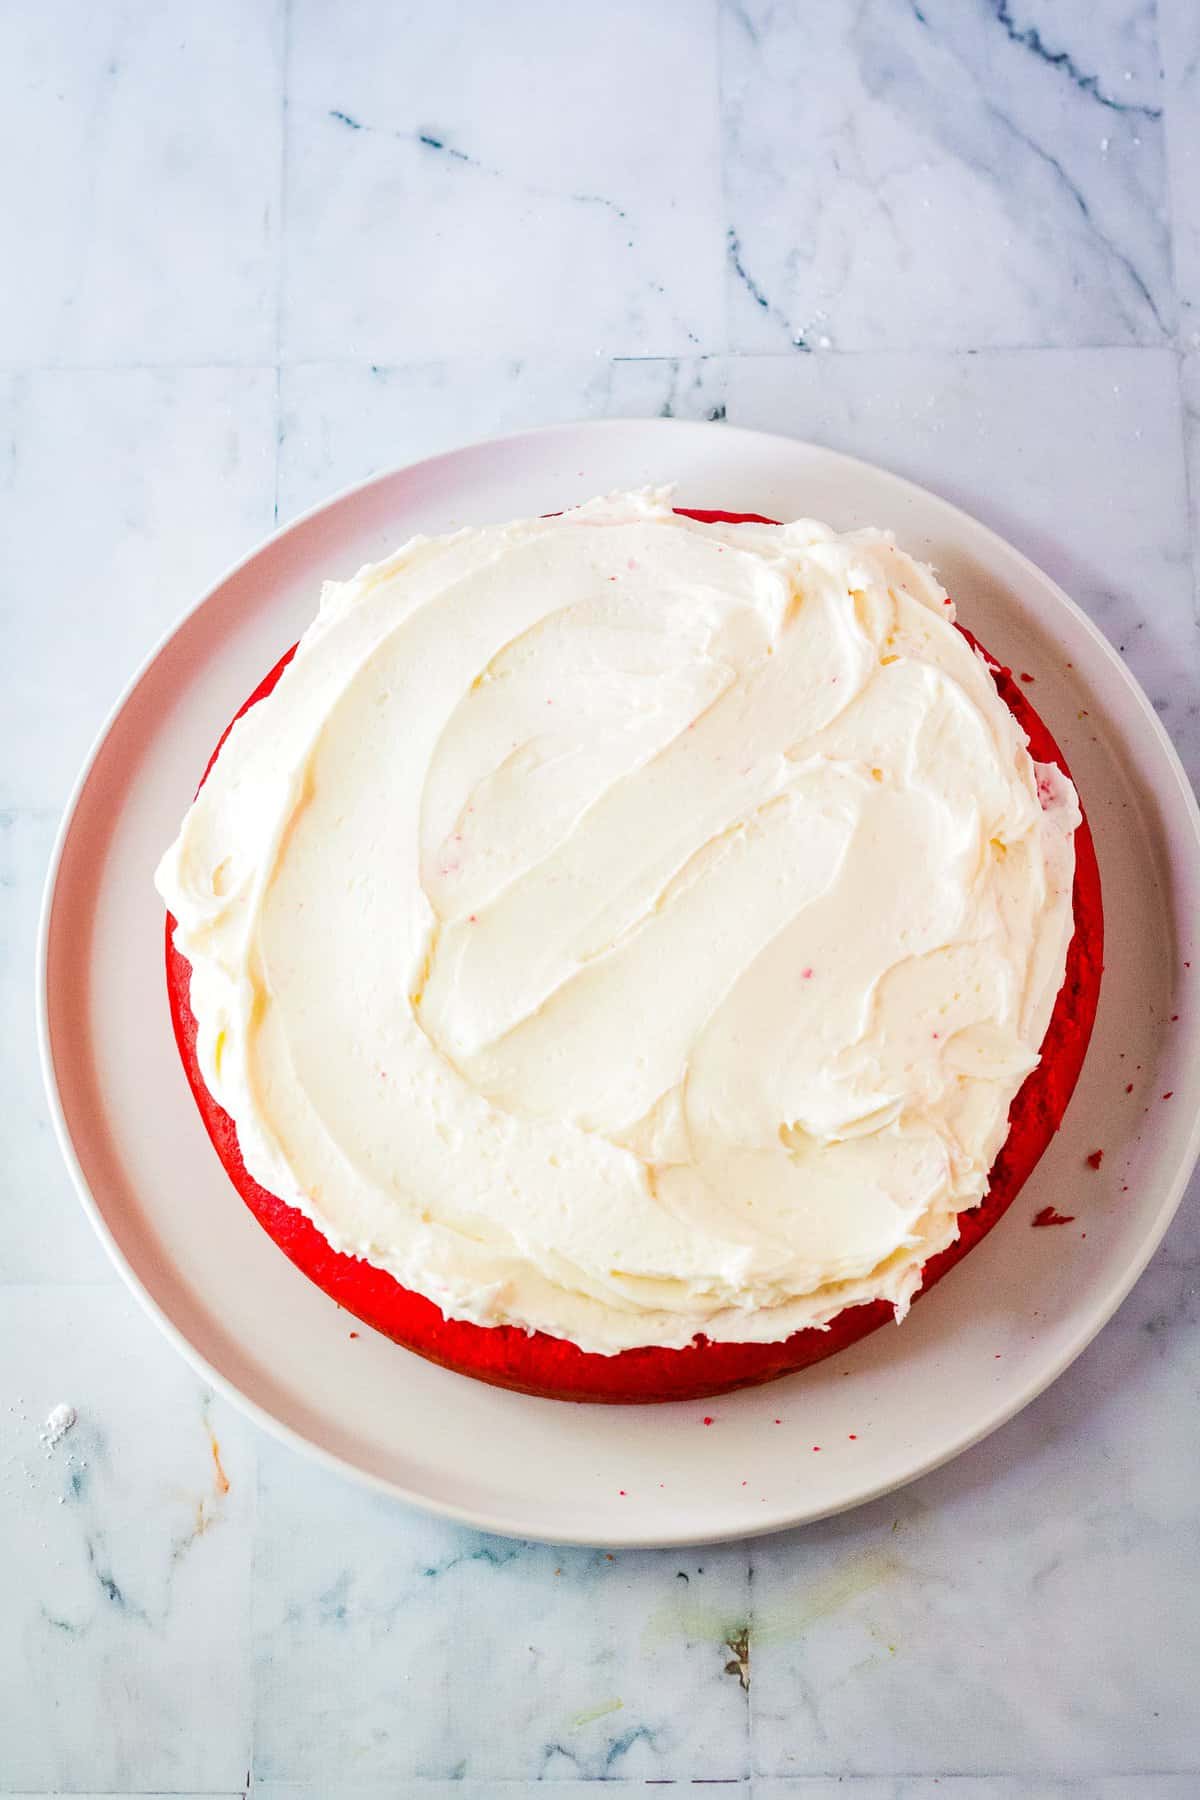 Putting buttercream frosting on top of round cake